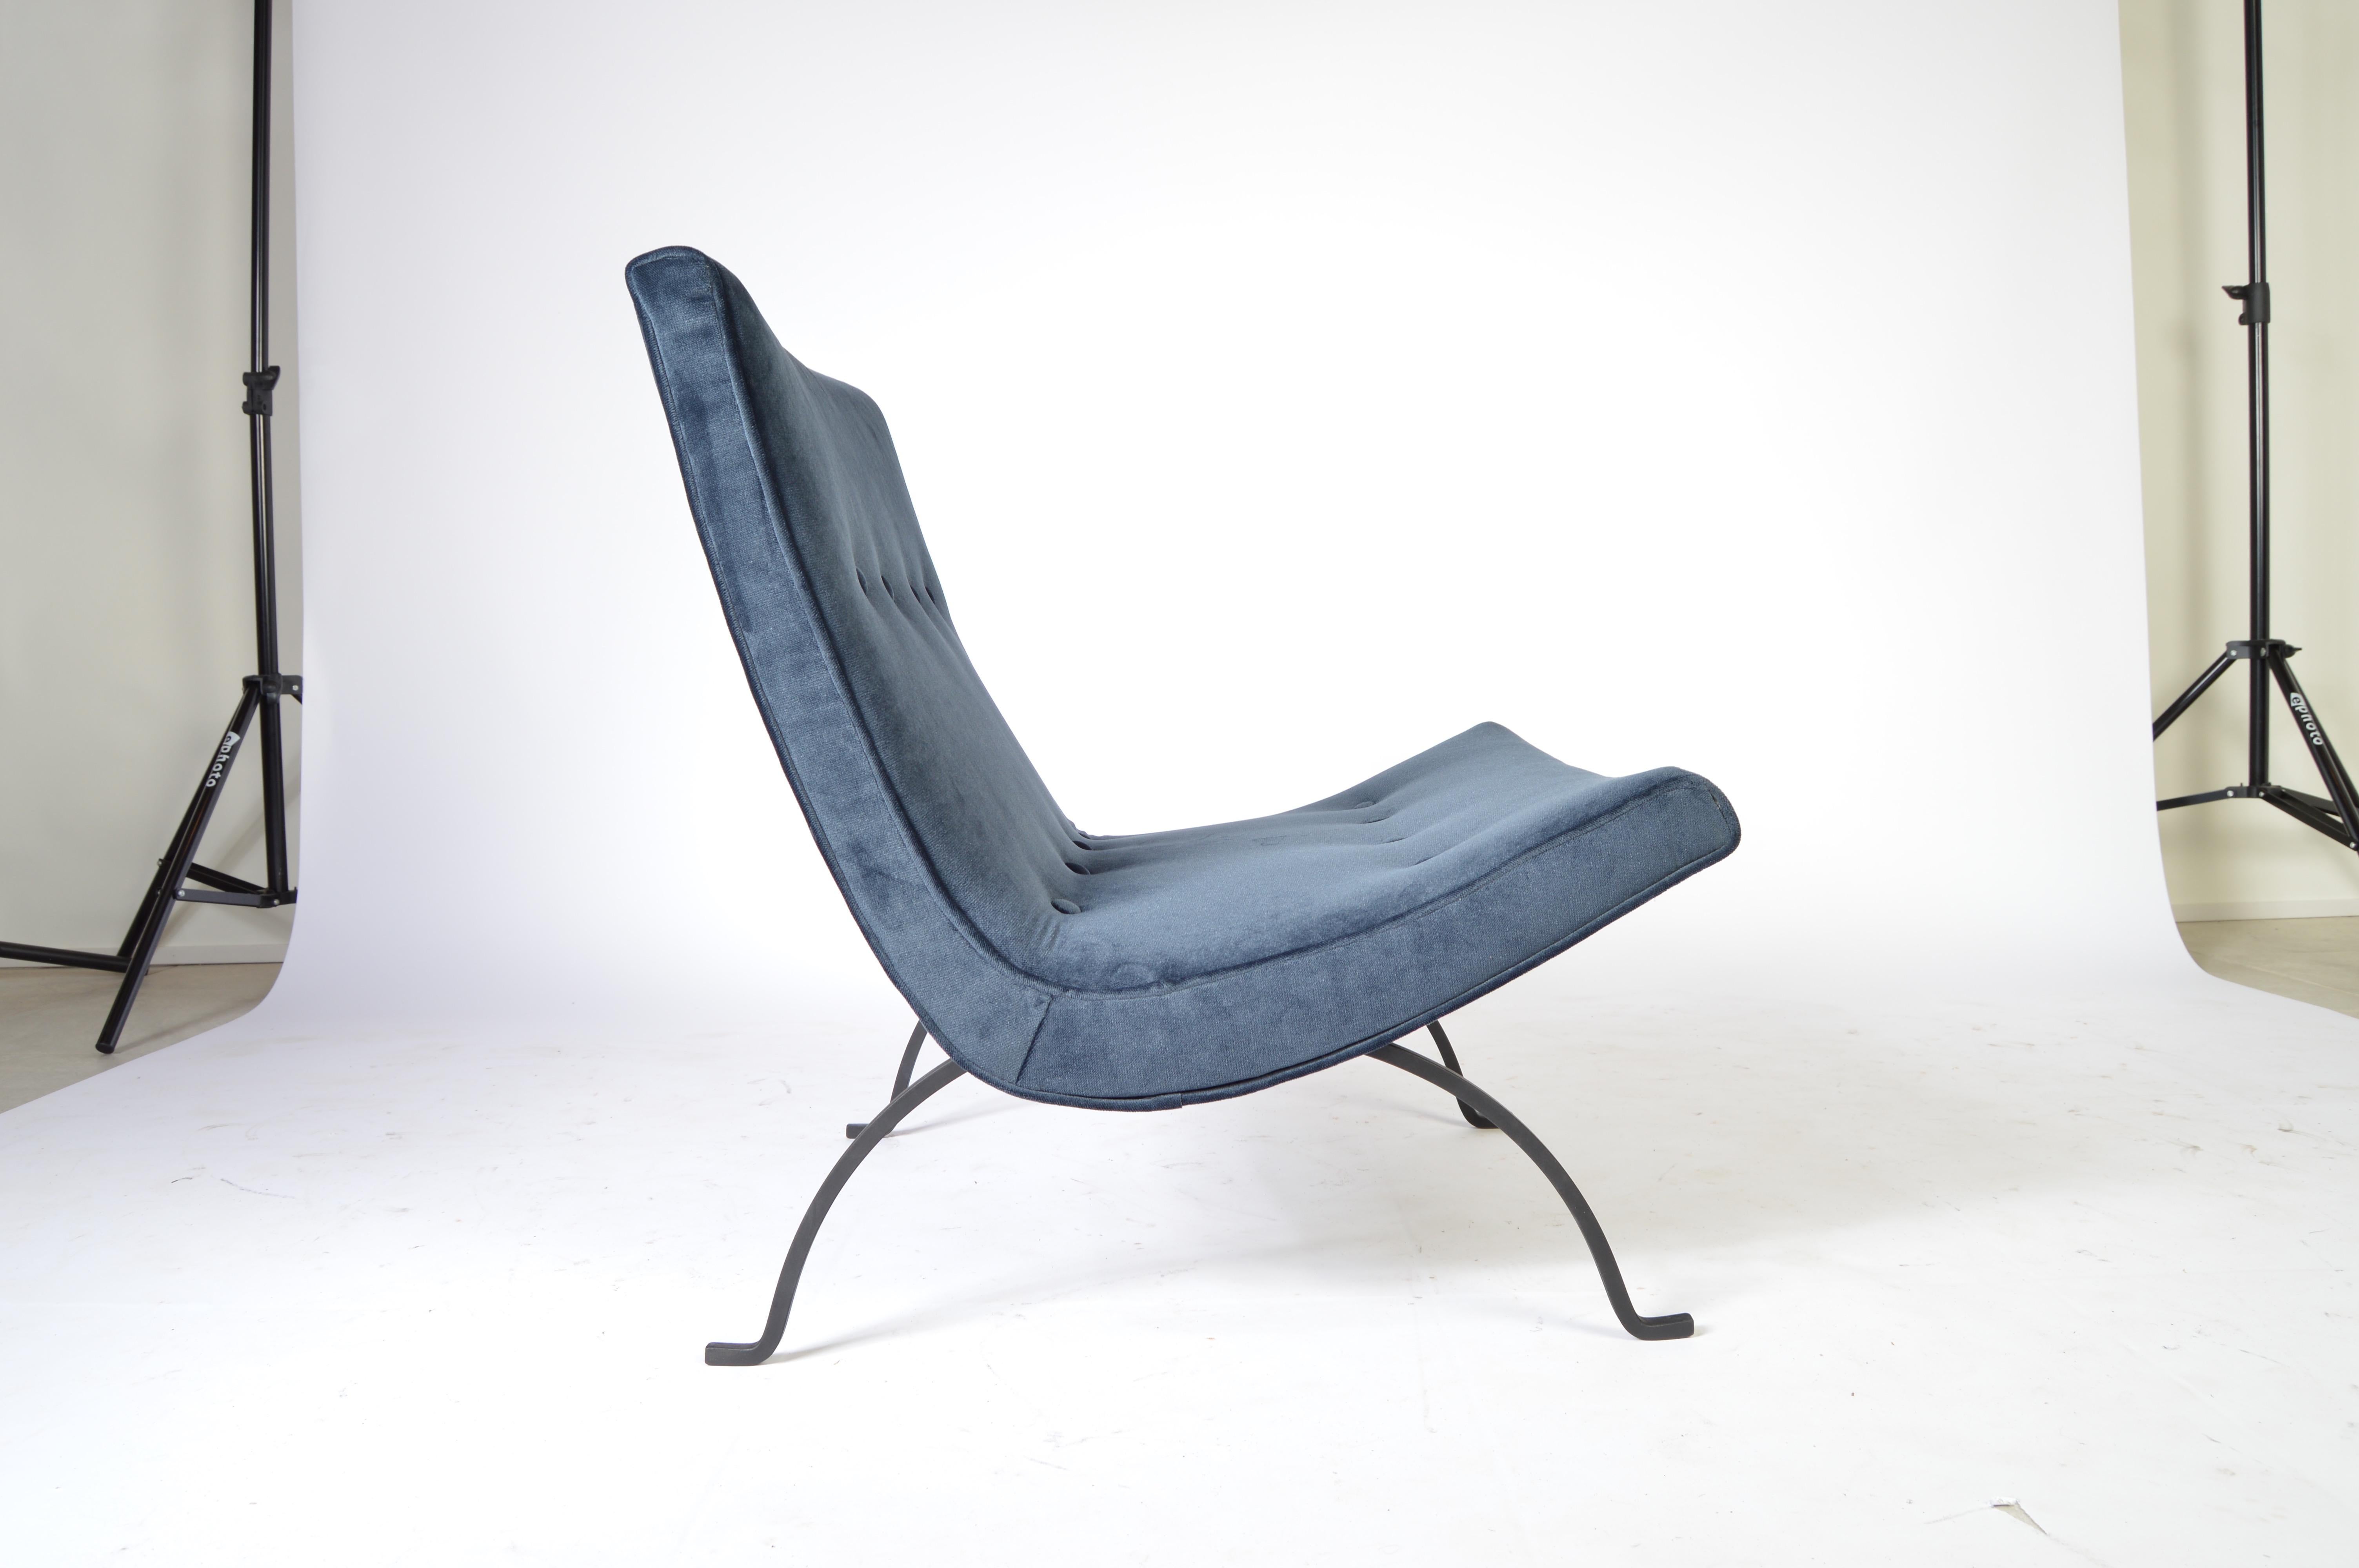 A 1950s scoop lounge chair designed by Milo Baughman having a black, solid iron frame and fresh velvet upholstery with new cushioning.